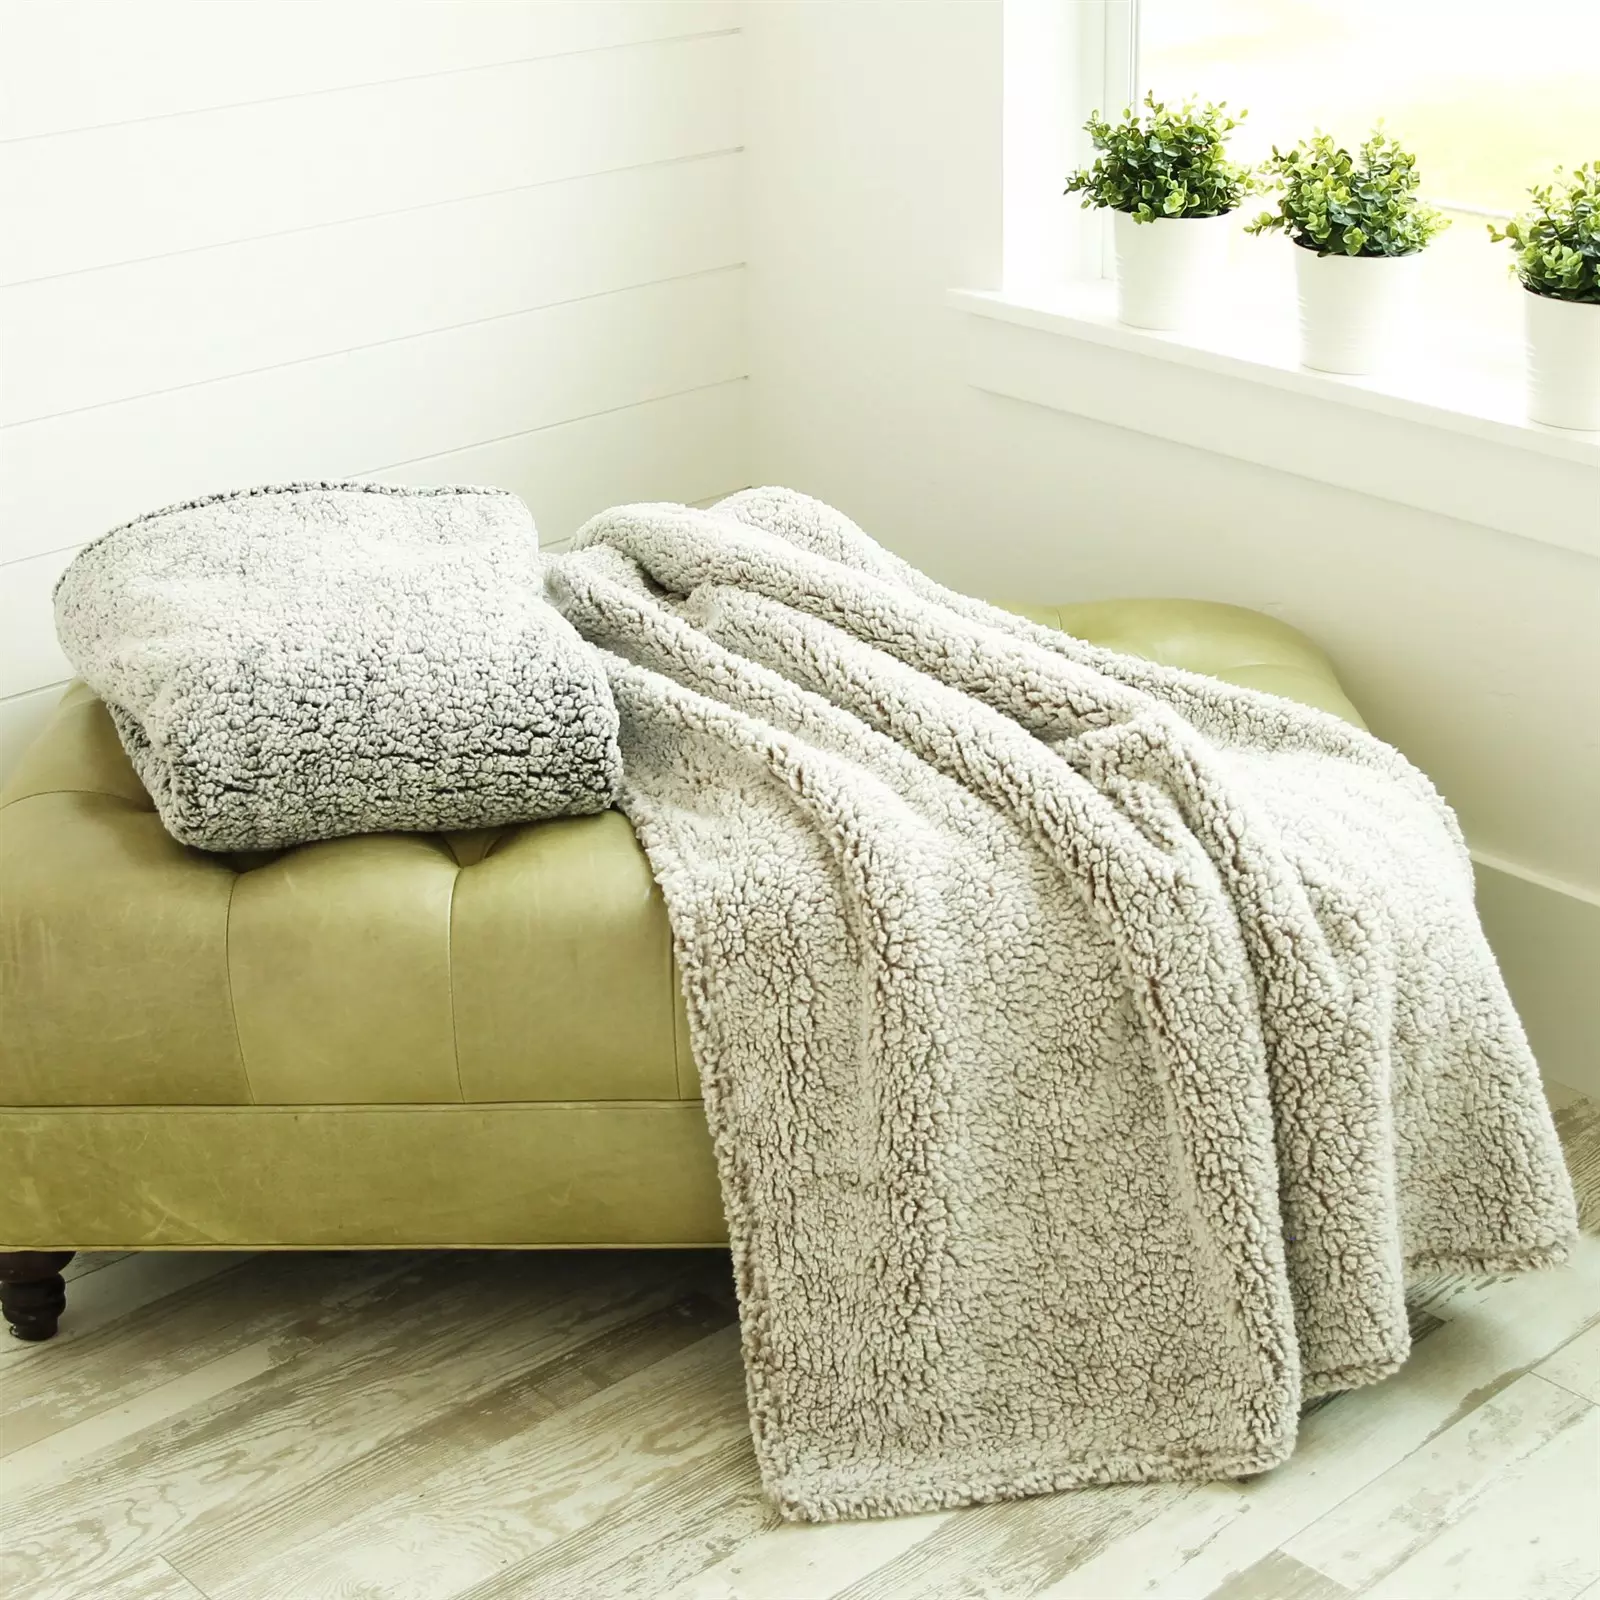 Epic Sherpa Blanket (54″x84″) Only $39.99!